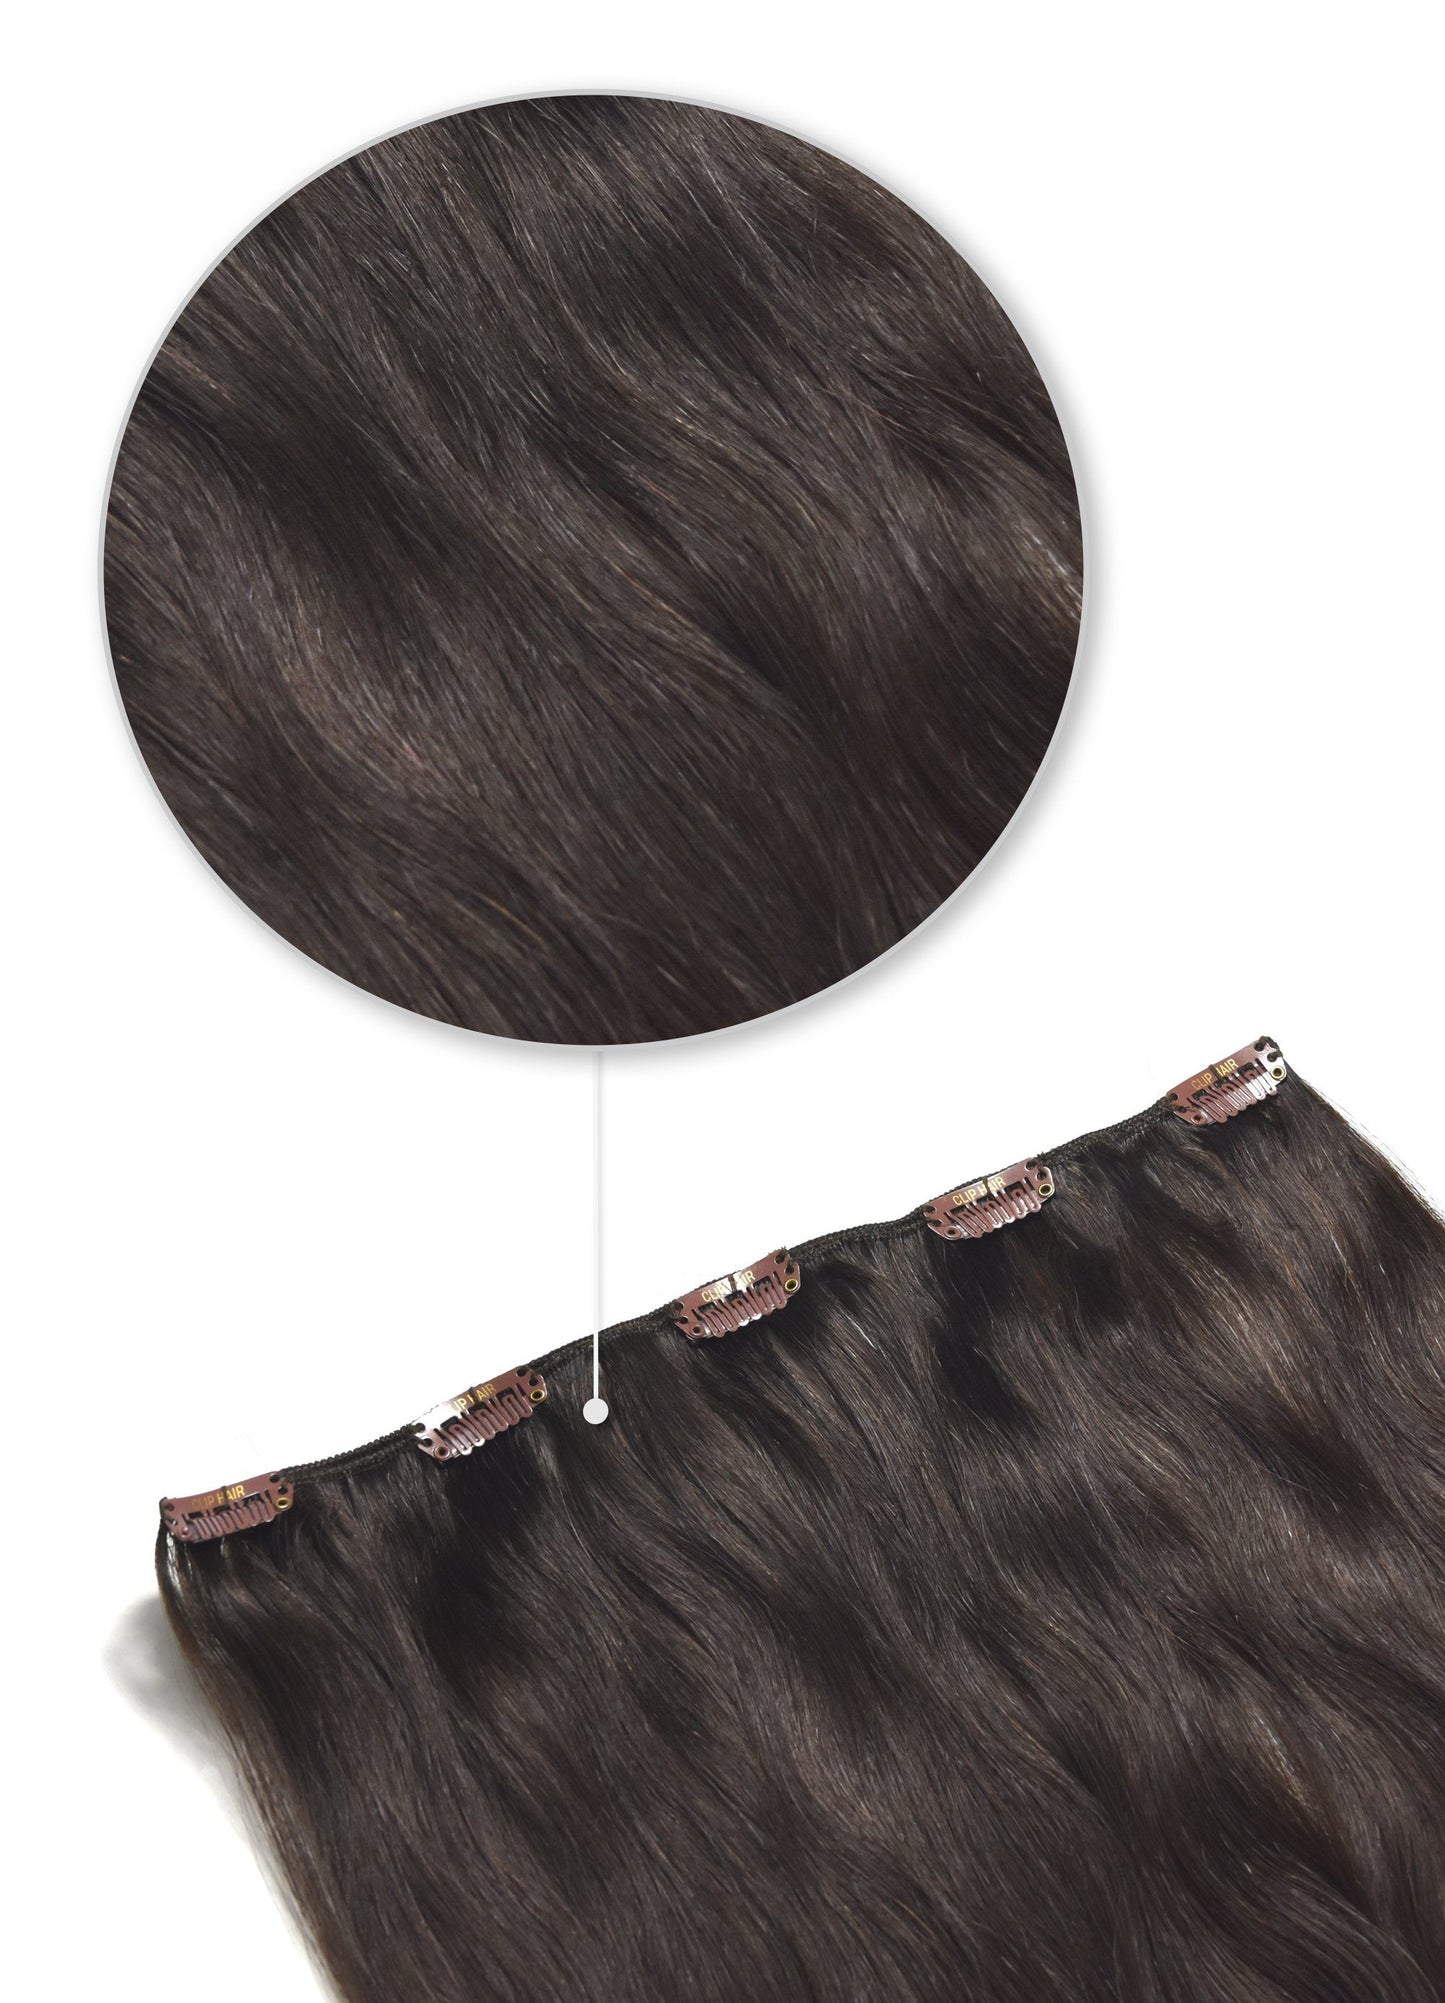 One Piece Top-up Remy Clip in Human Hair Extensions - Darkest Brown (#2) One Piece Clip In Hair Extensions cliphair 